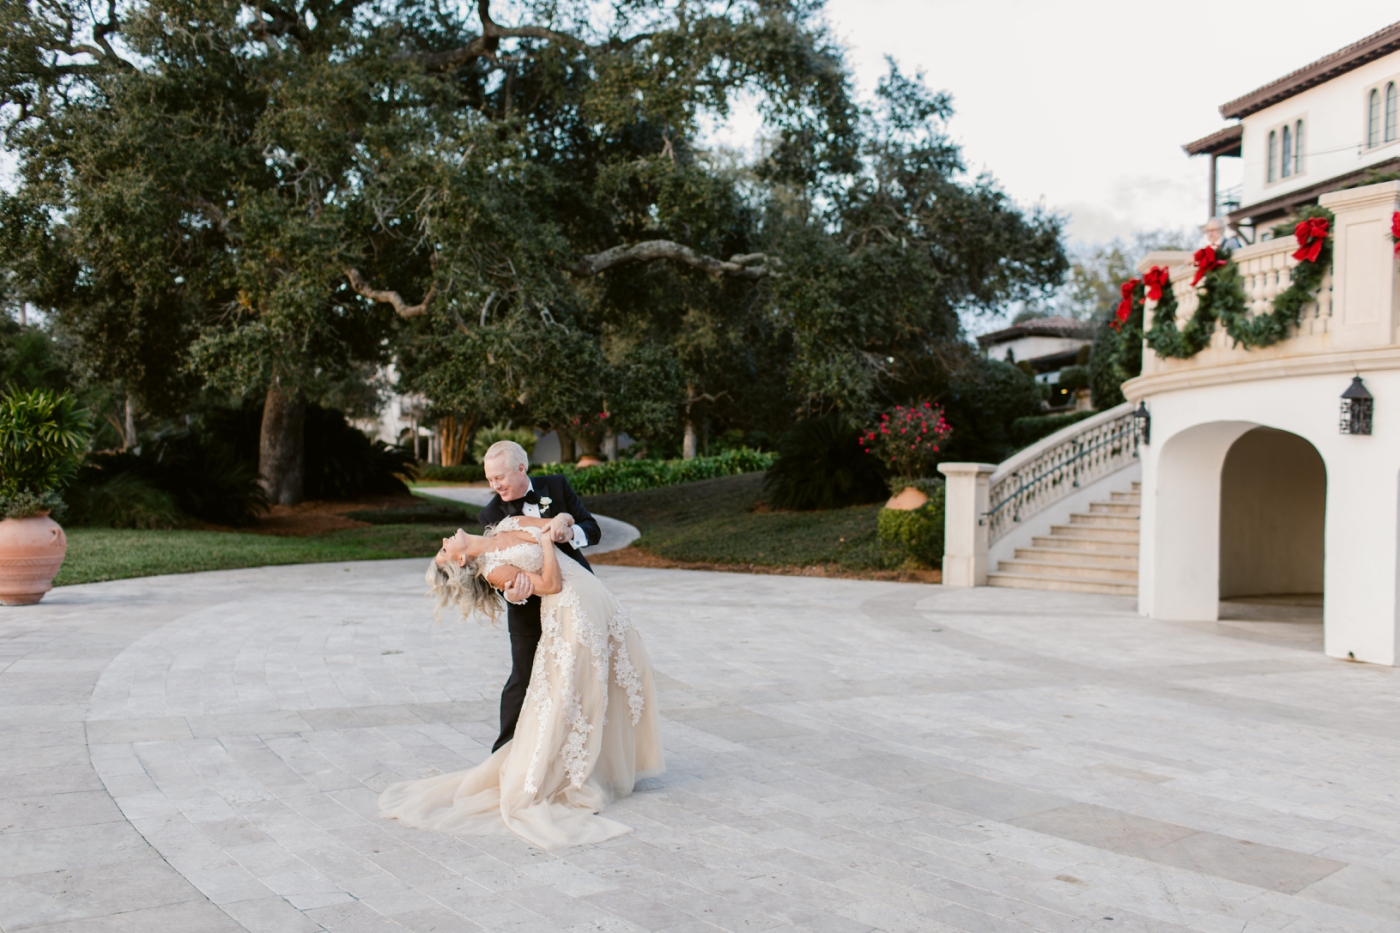 Bride and groom portraits at The Cloister Chapel